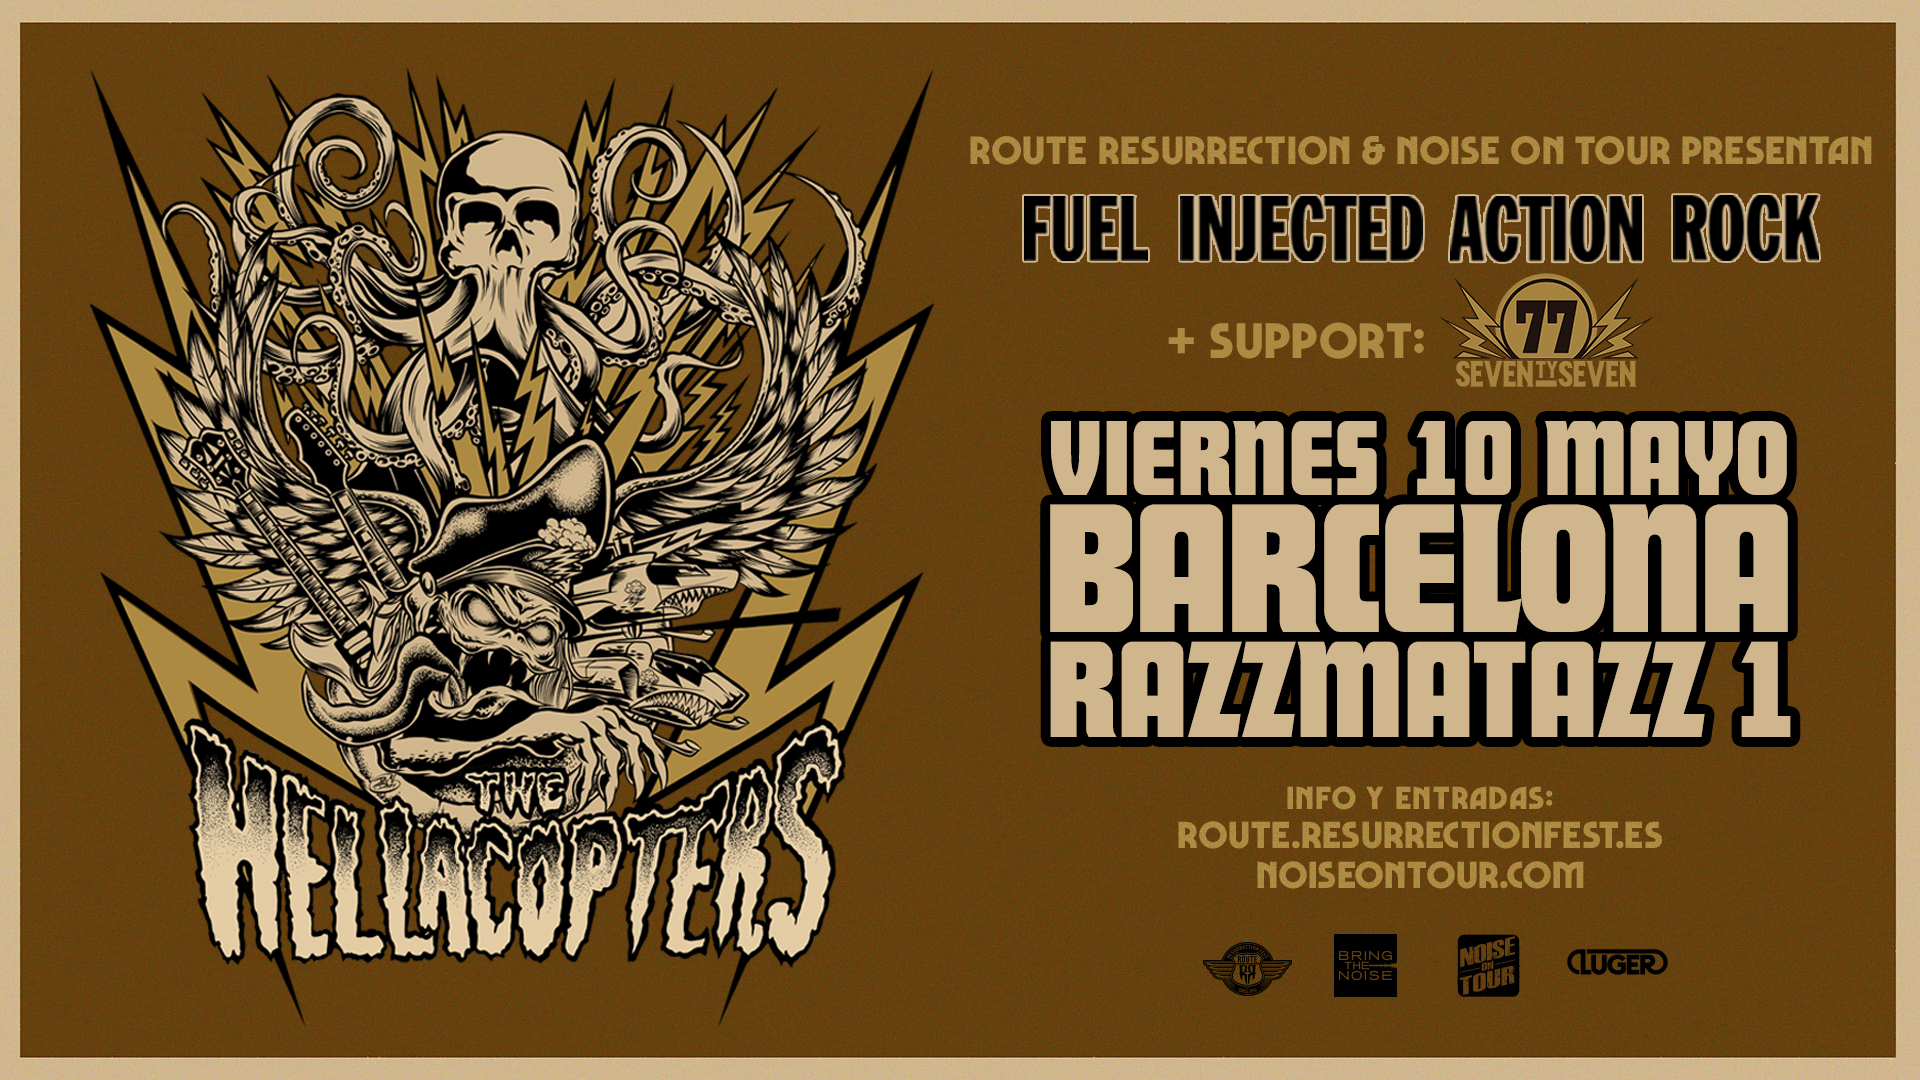 Route Resurrection Fest 2019 - The Hellacopters - Event